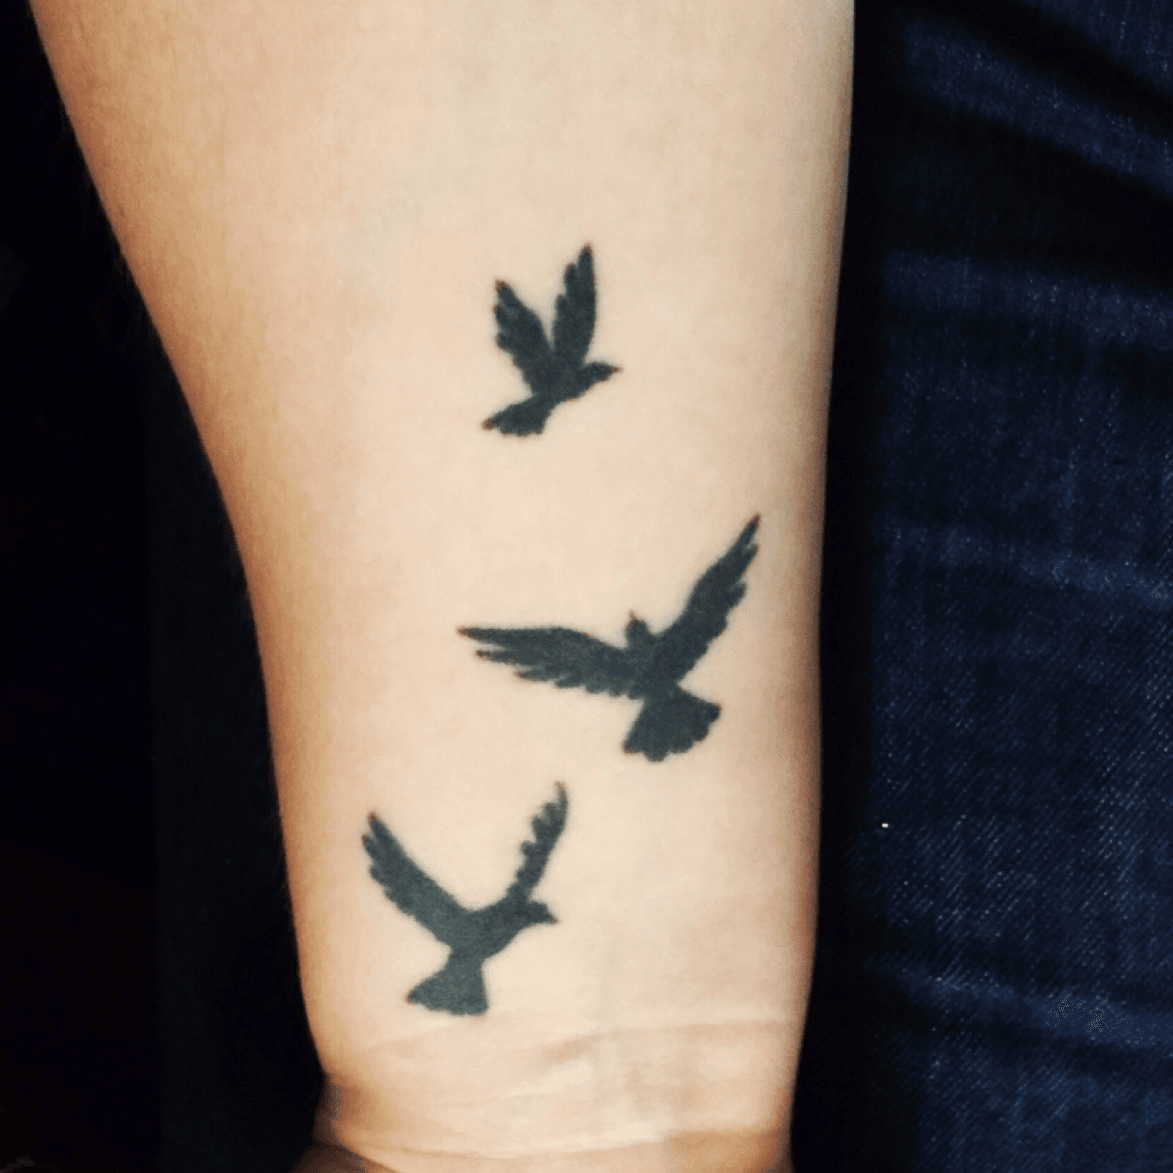 Ive learned that doves and ravens fly the same  Flying tattoo Sleeve  tattoos Dove tattoo